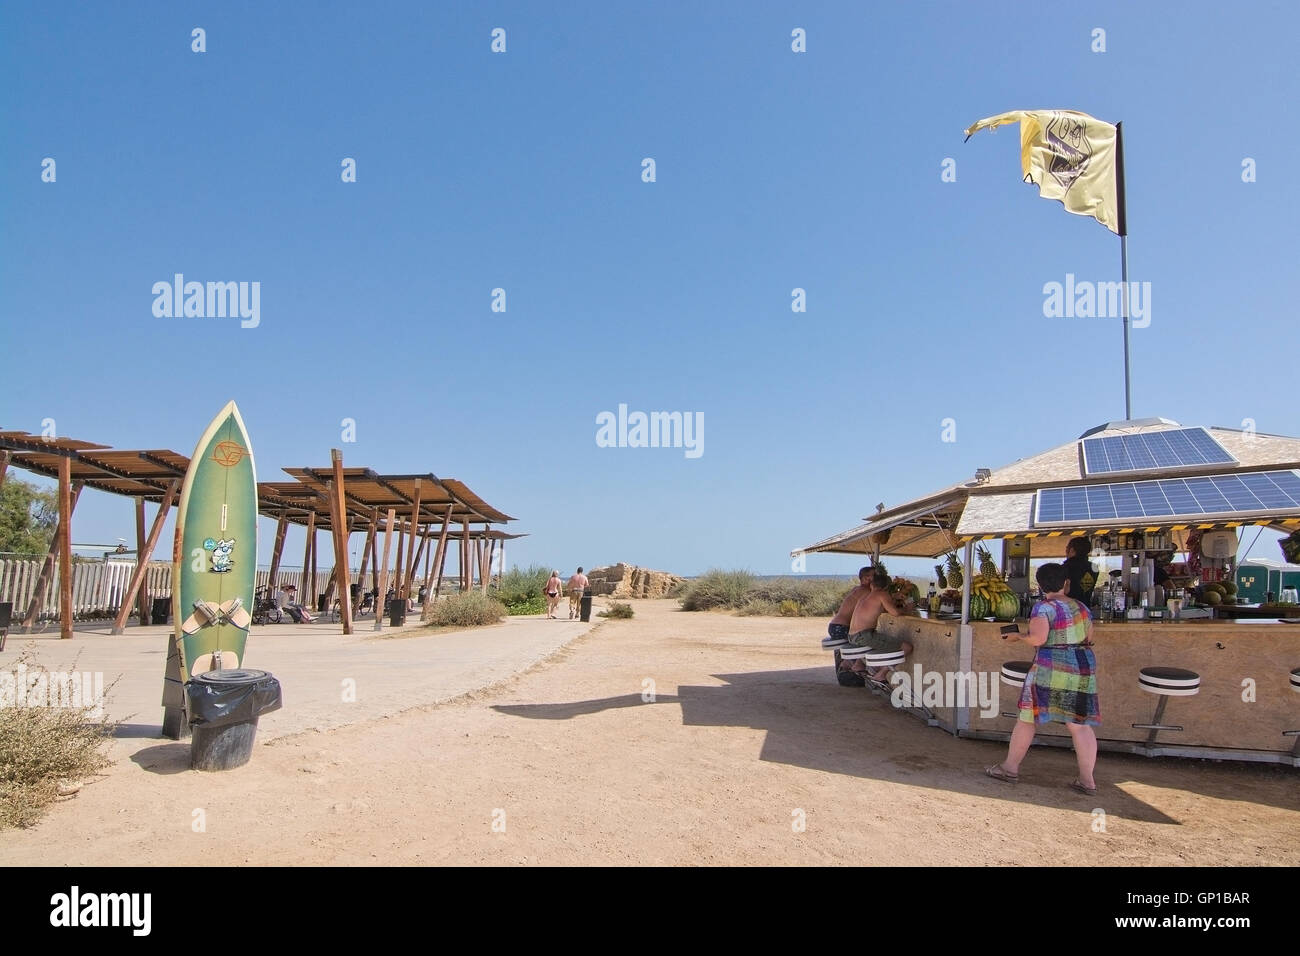 Small beach hut cafe along outdoor bicycling track on a sunny day on July 30, 2016 in Palma de Mallorca, Balearic islands, Spain Stock Photo